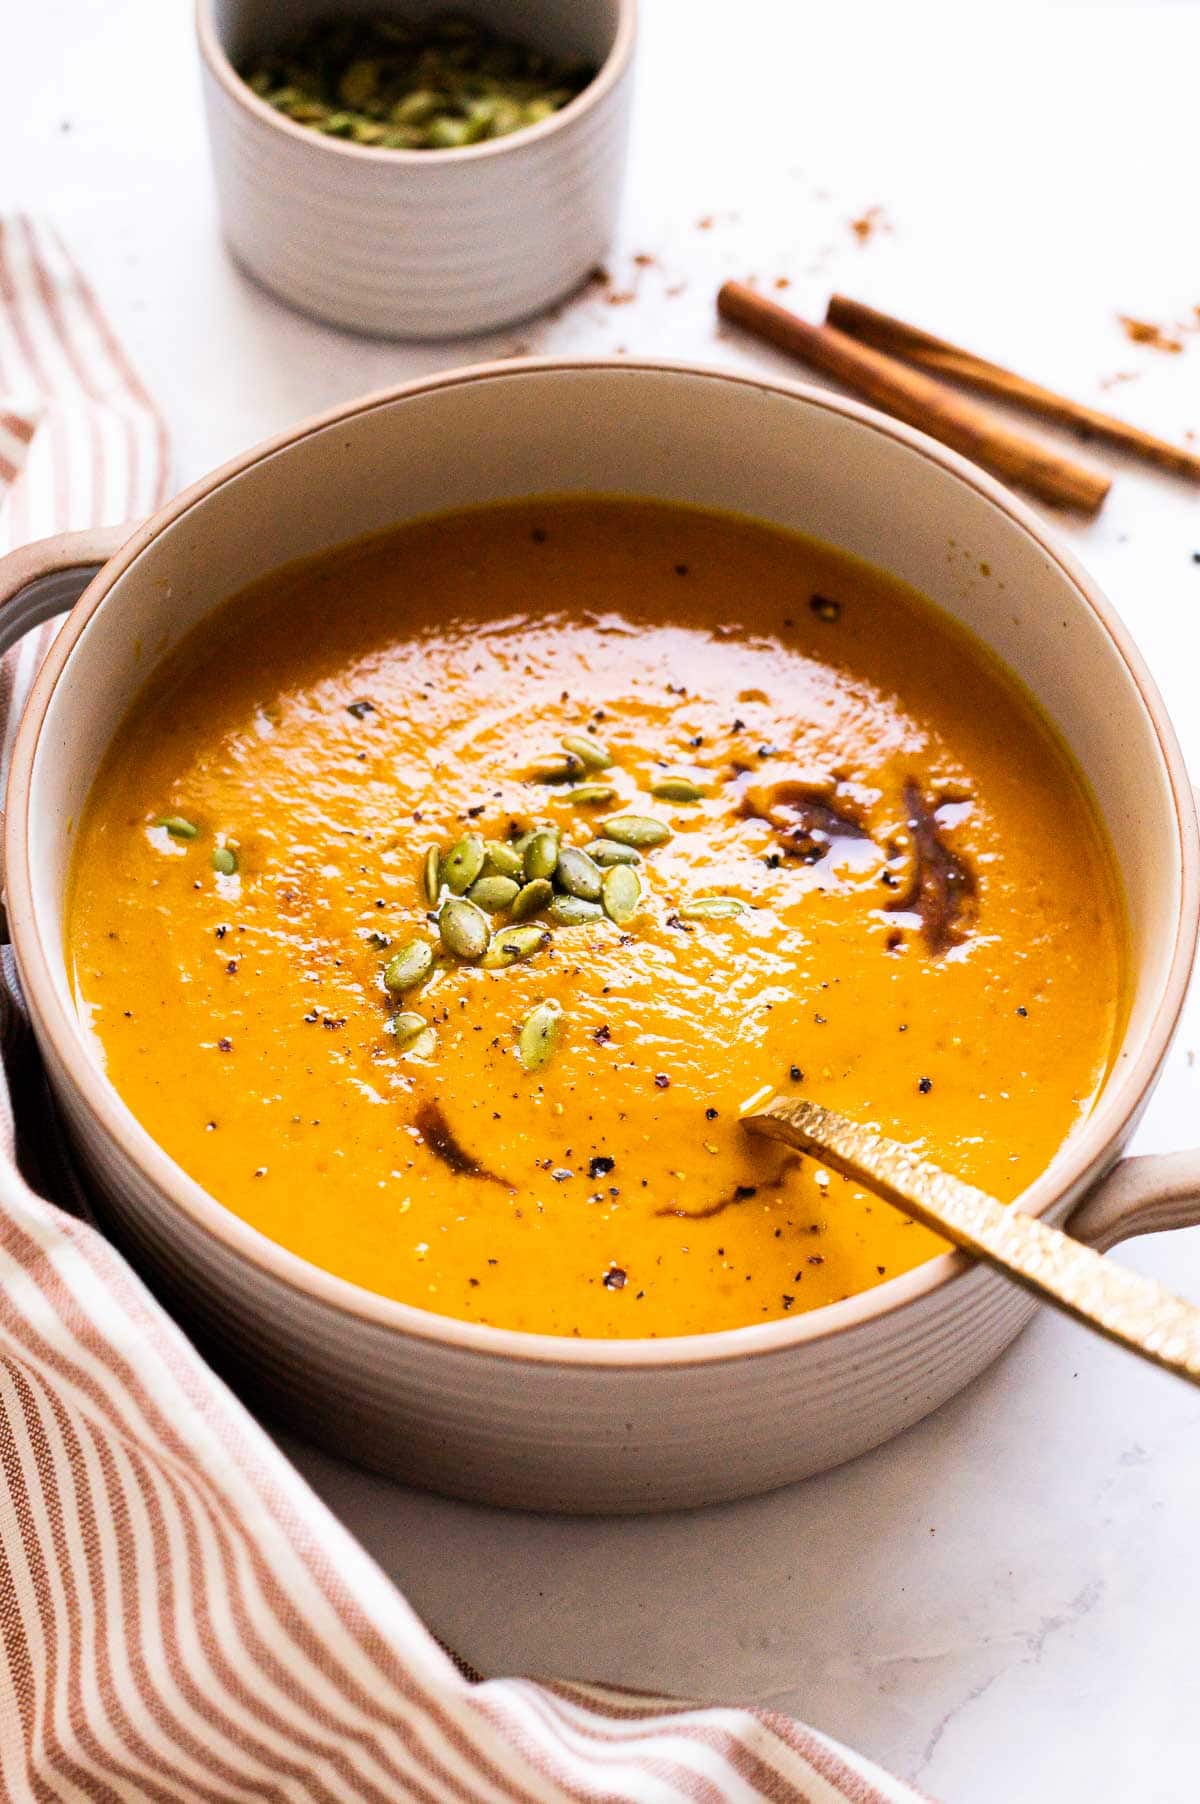 Healthy pumpkin soup in a bowl garnished with soy sauce and pumpkin seeds.